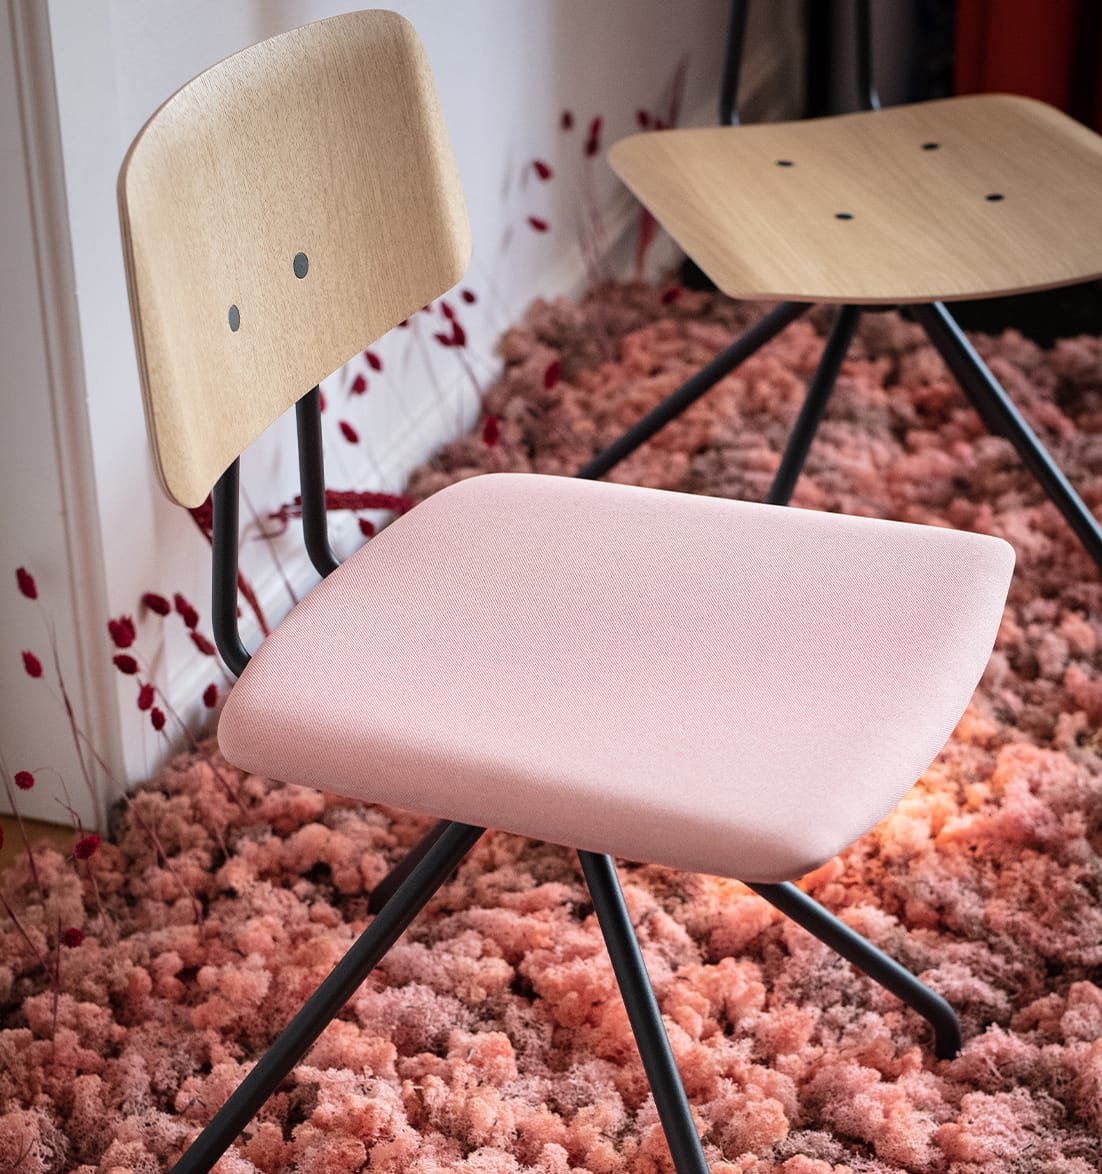 Two pink Share office desk chairs on a rug.